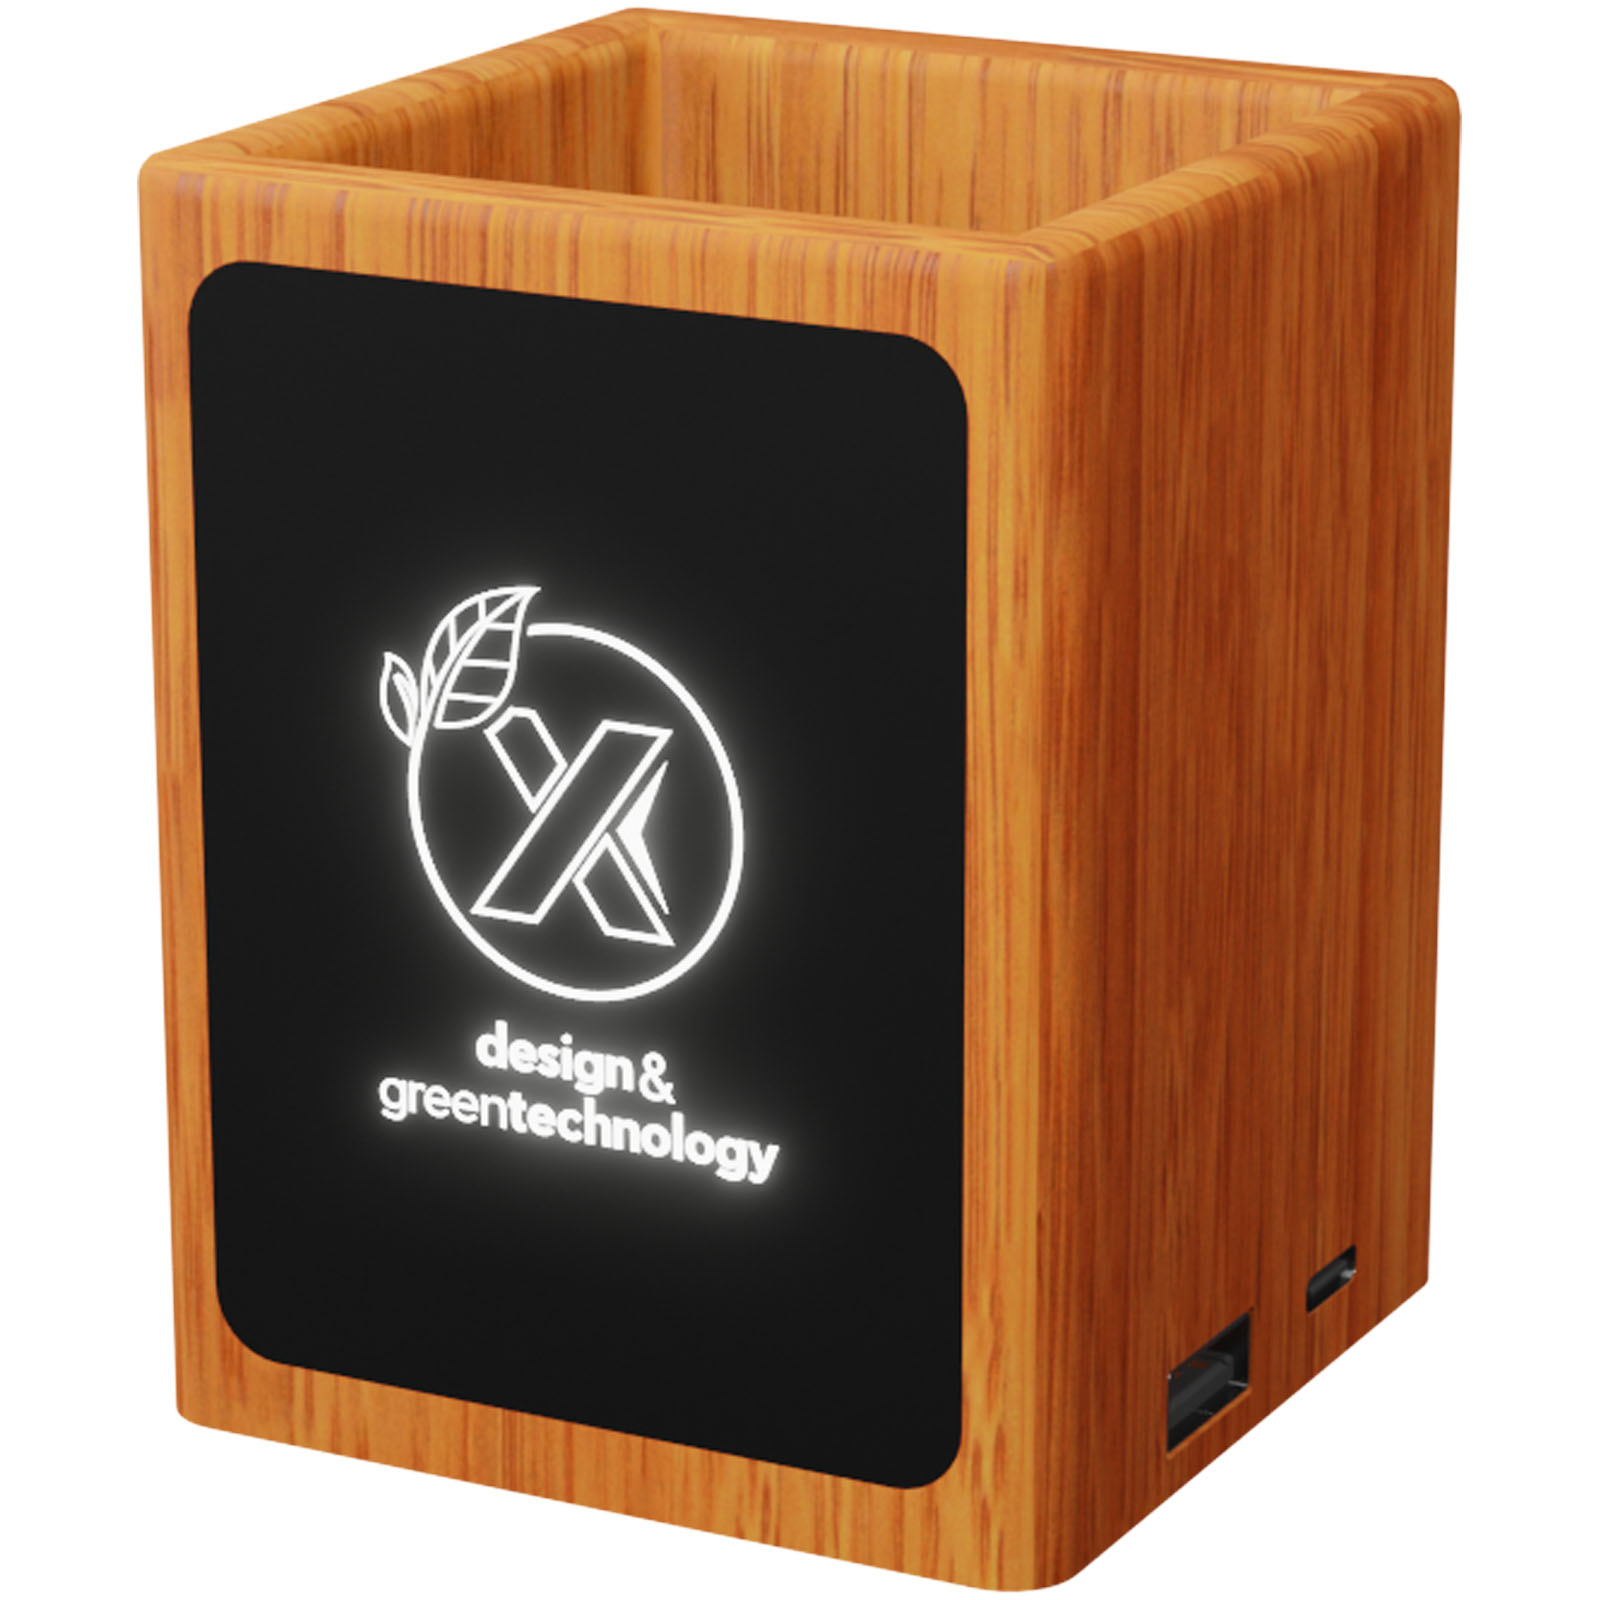 Wooden USB Pencil Holder with Light-Up Logo - Lydd